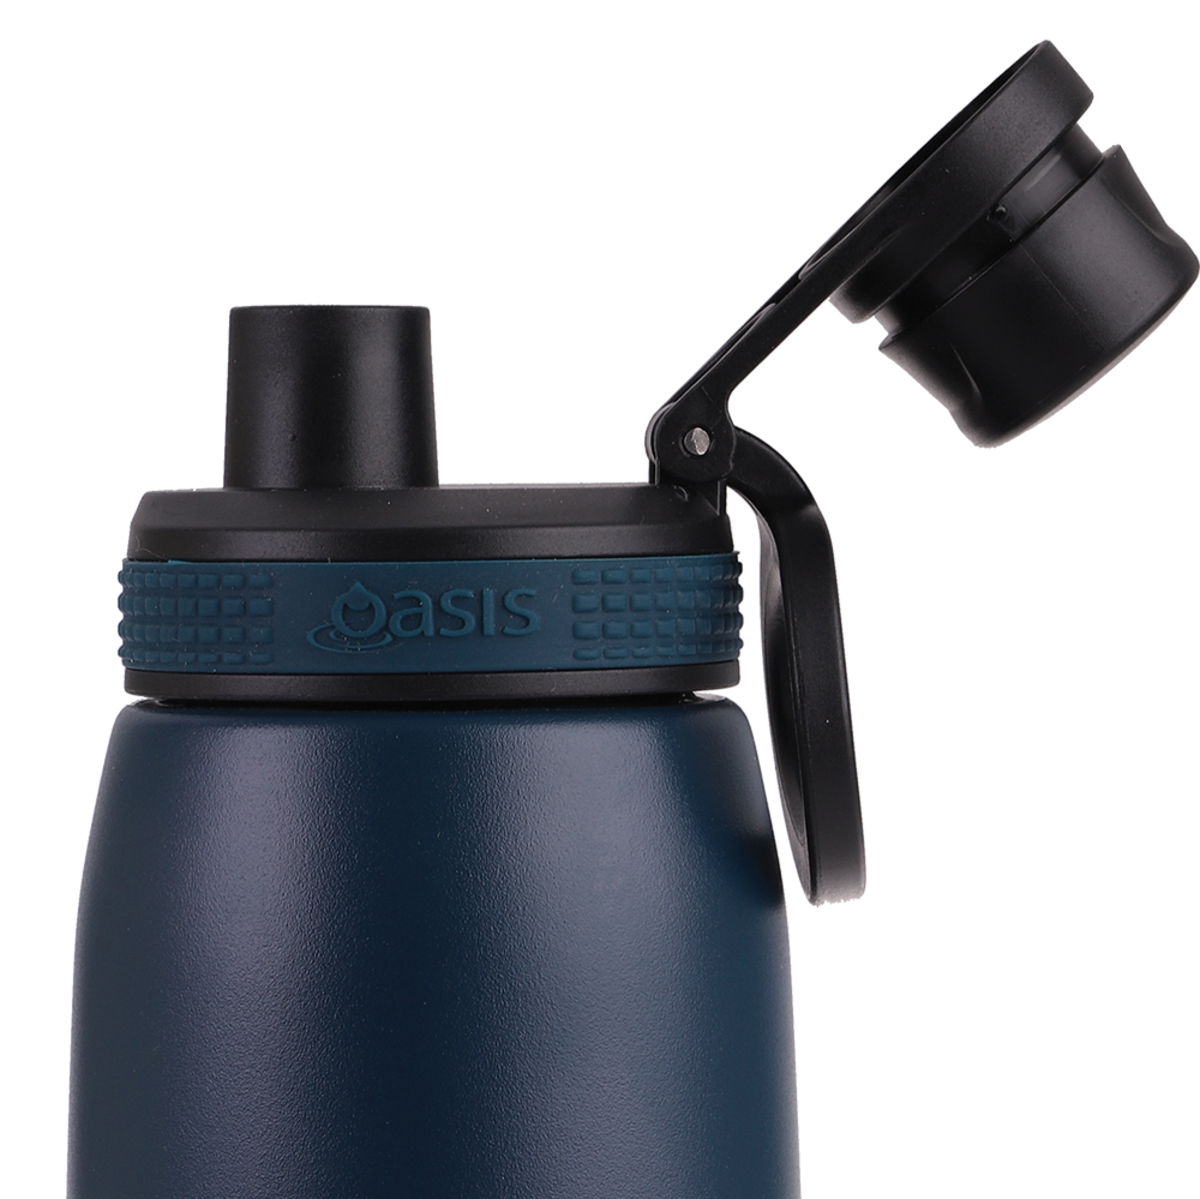 oasis stainless steel double wall insulated sports bottle w/ screw cap 780ml - navy